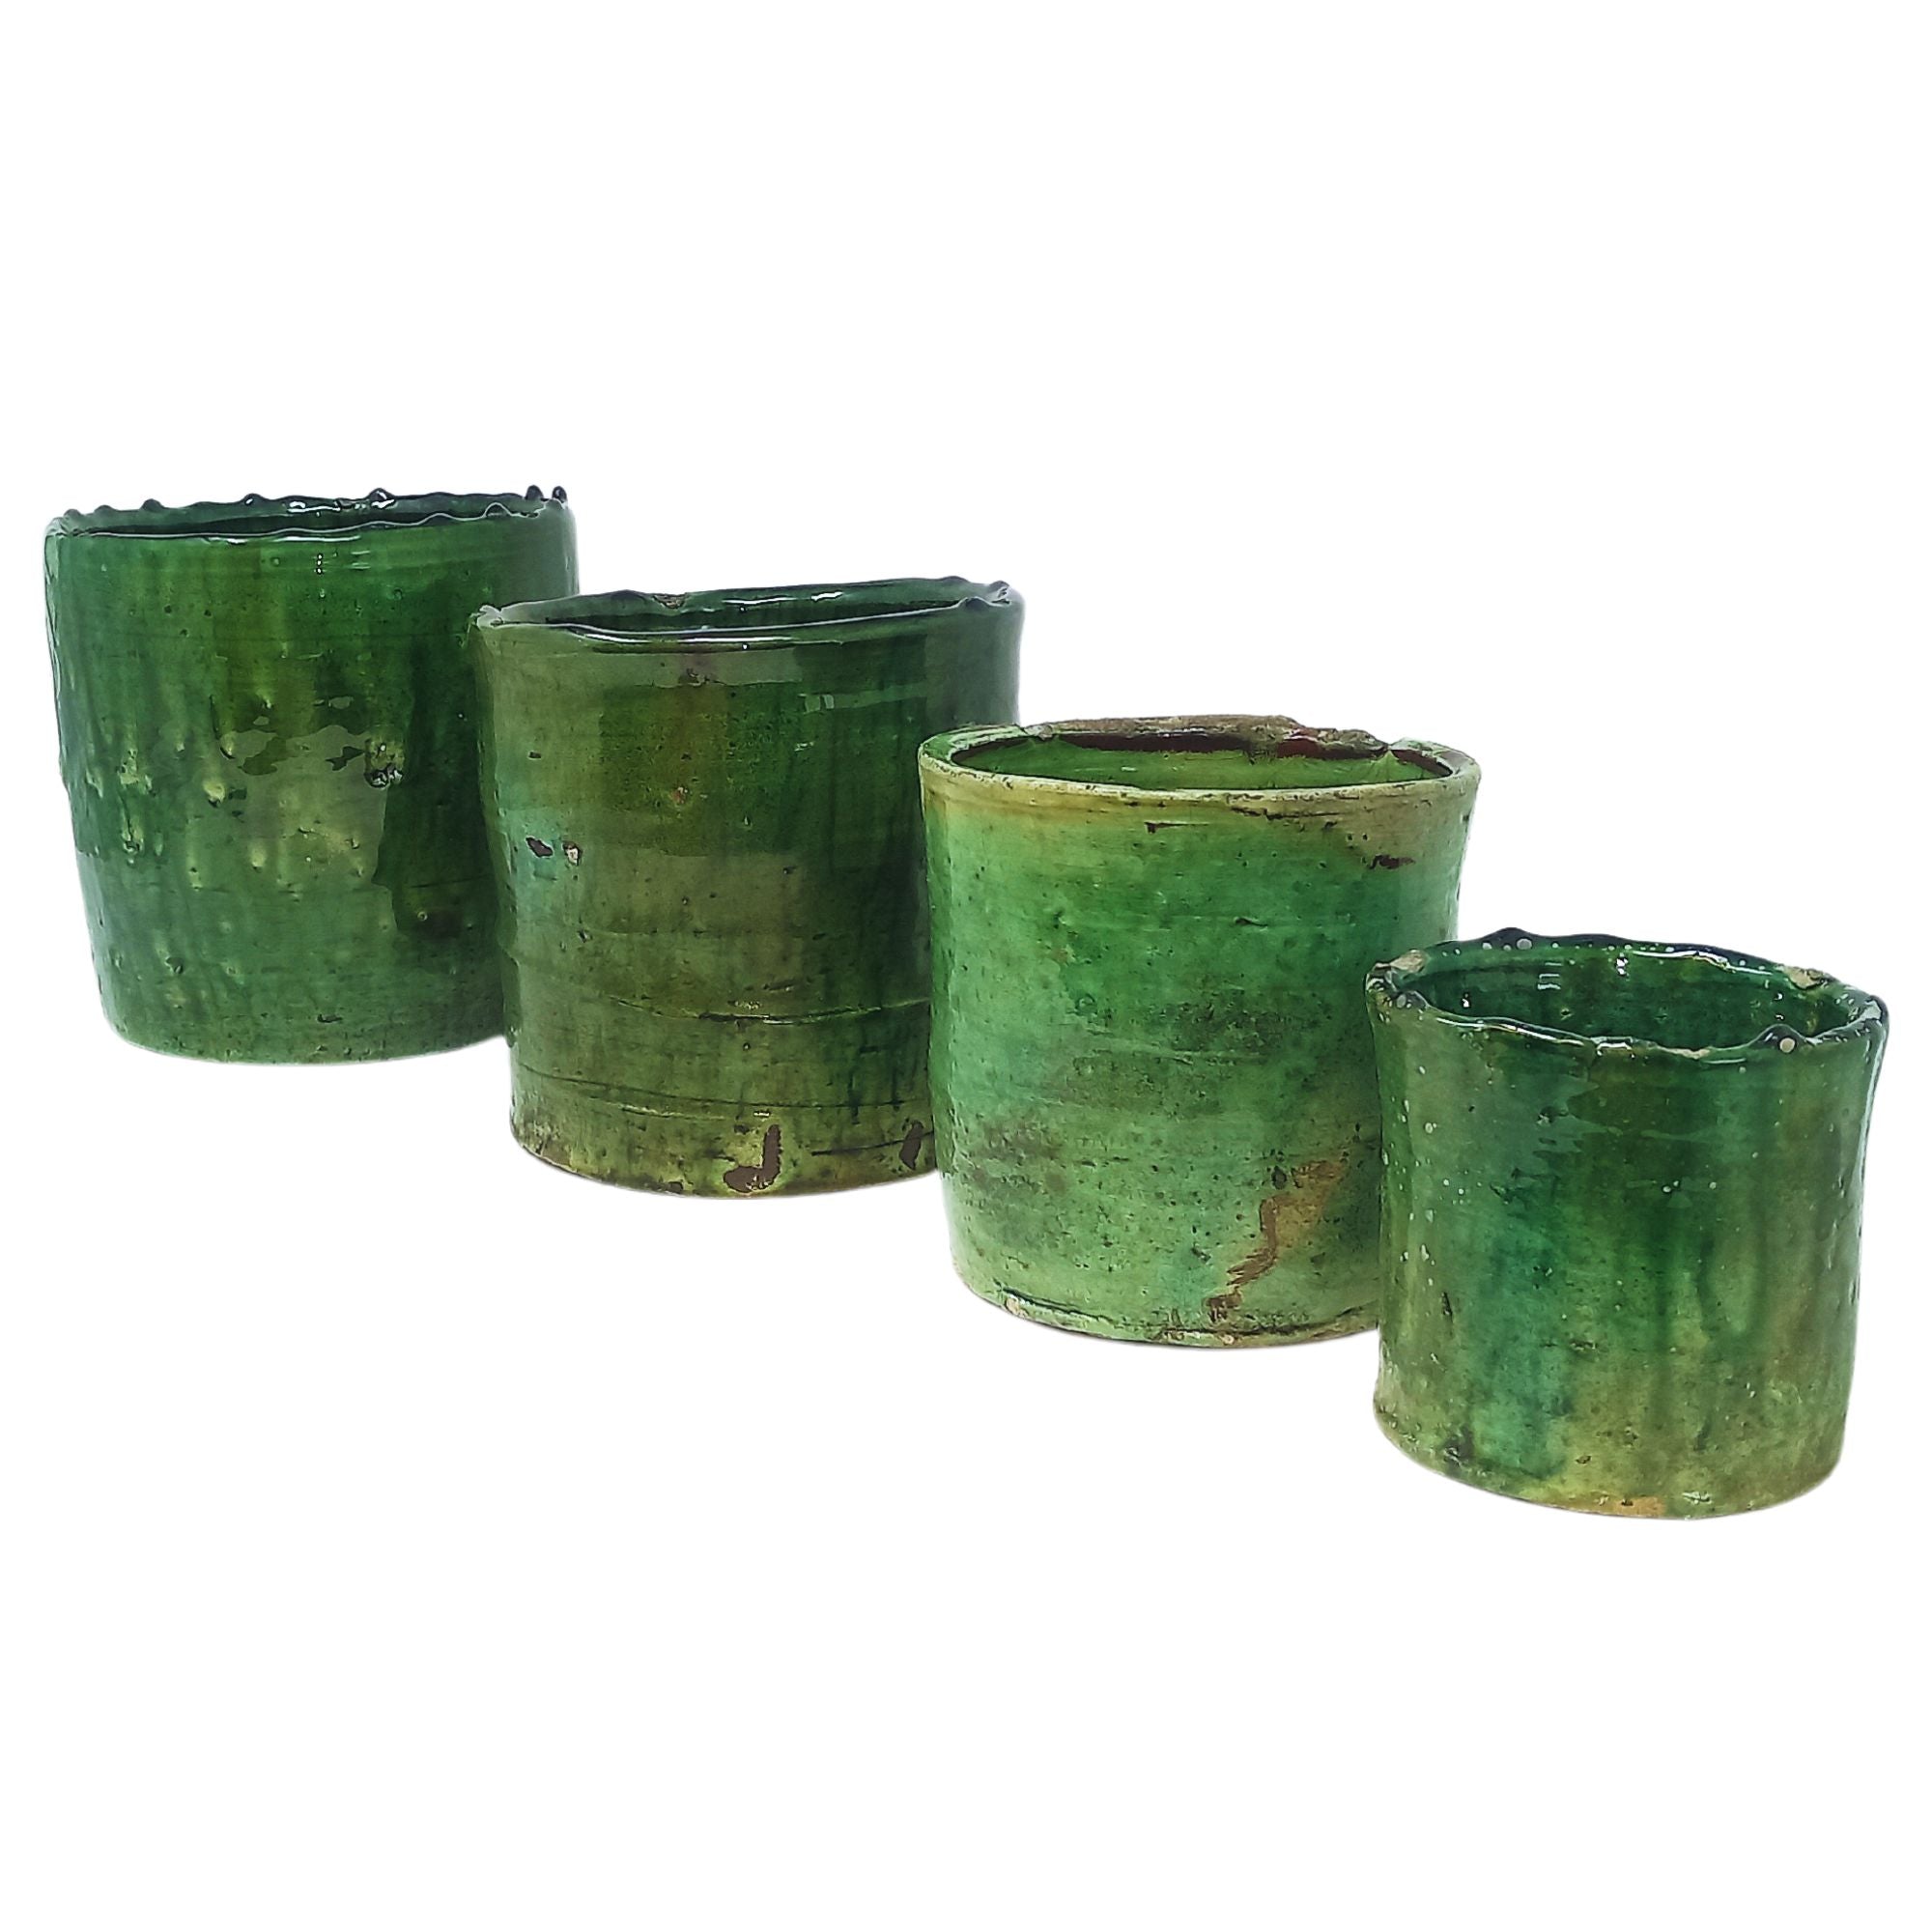 picture of four different sizes of tamegroute pots in dark green hues